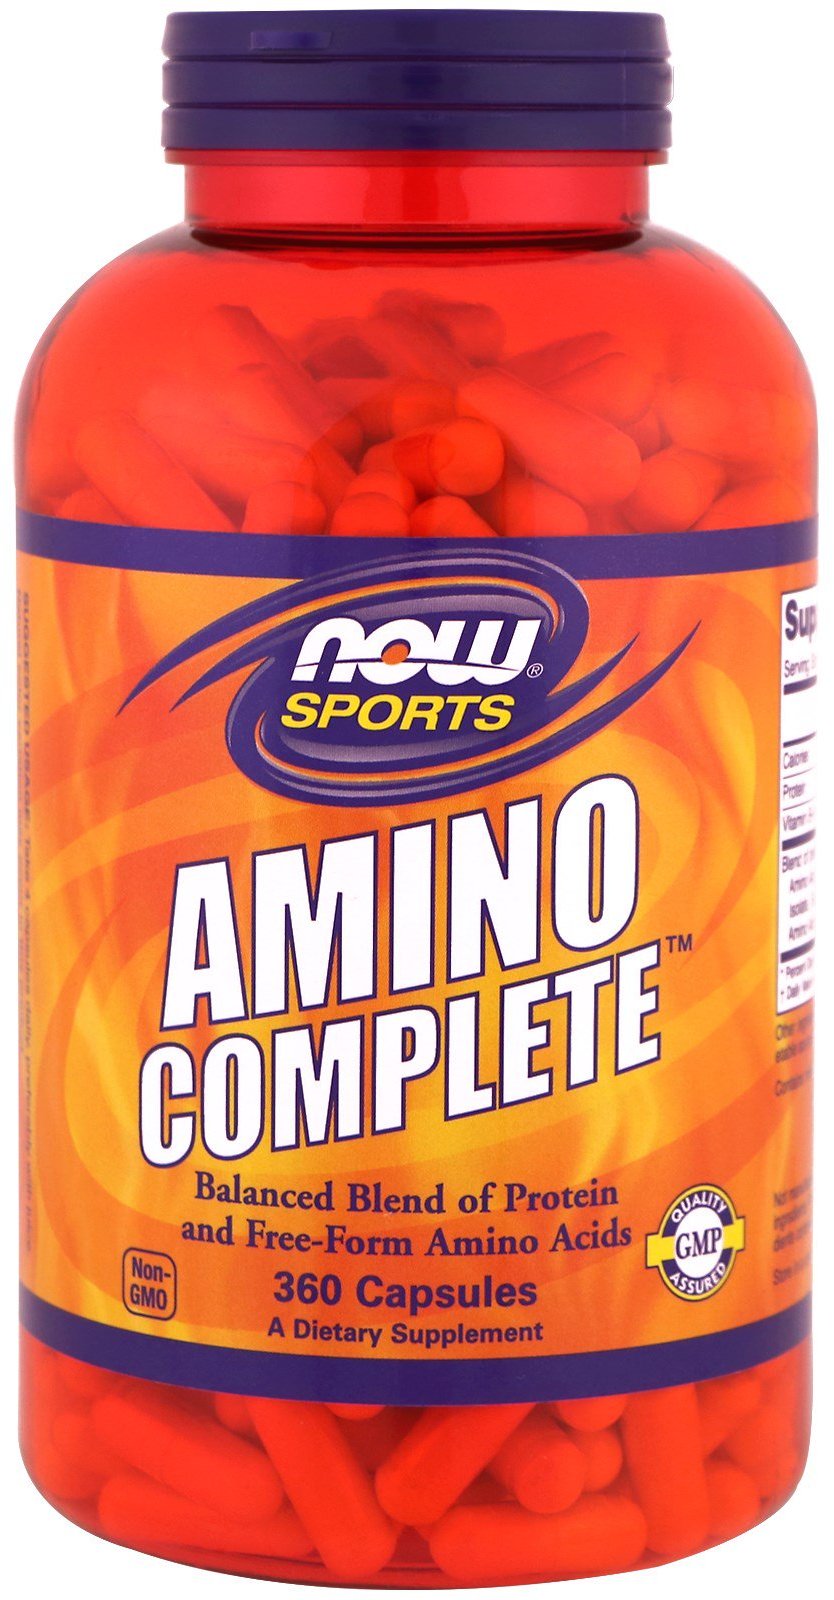 Amino gel. Now Amino complete 360 капсул. Аминокислоты Now Amino complete. Amino complete капсулы. Аминокислоты гелевые капсулы.